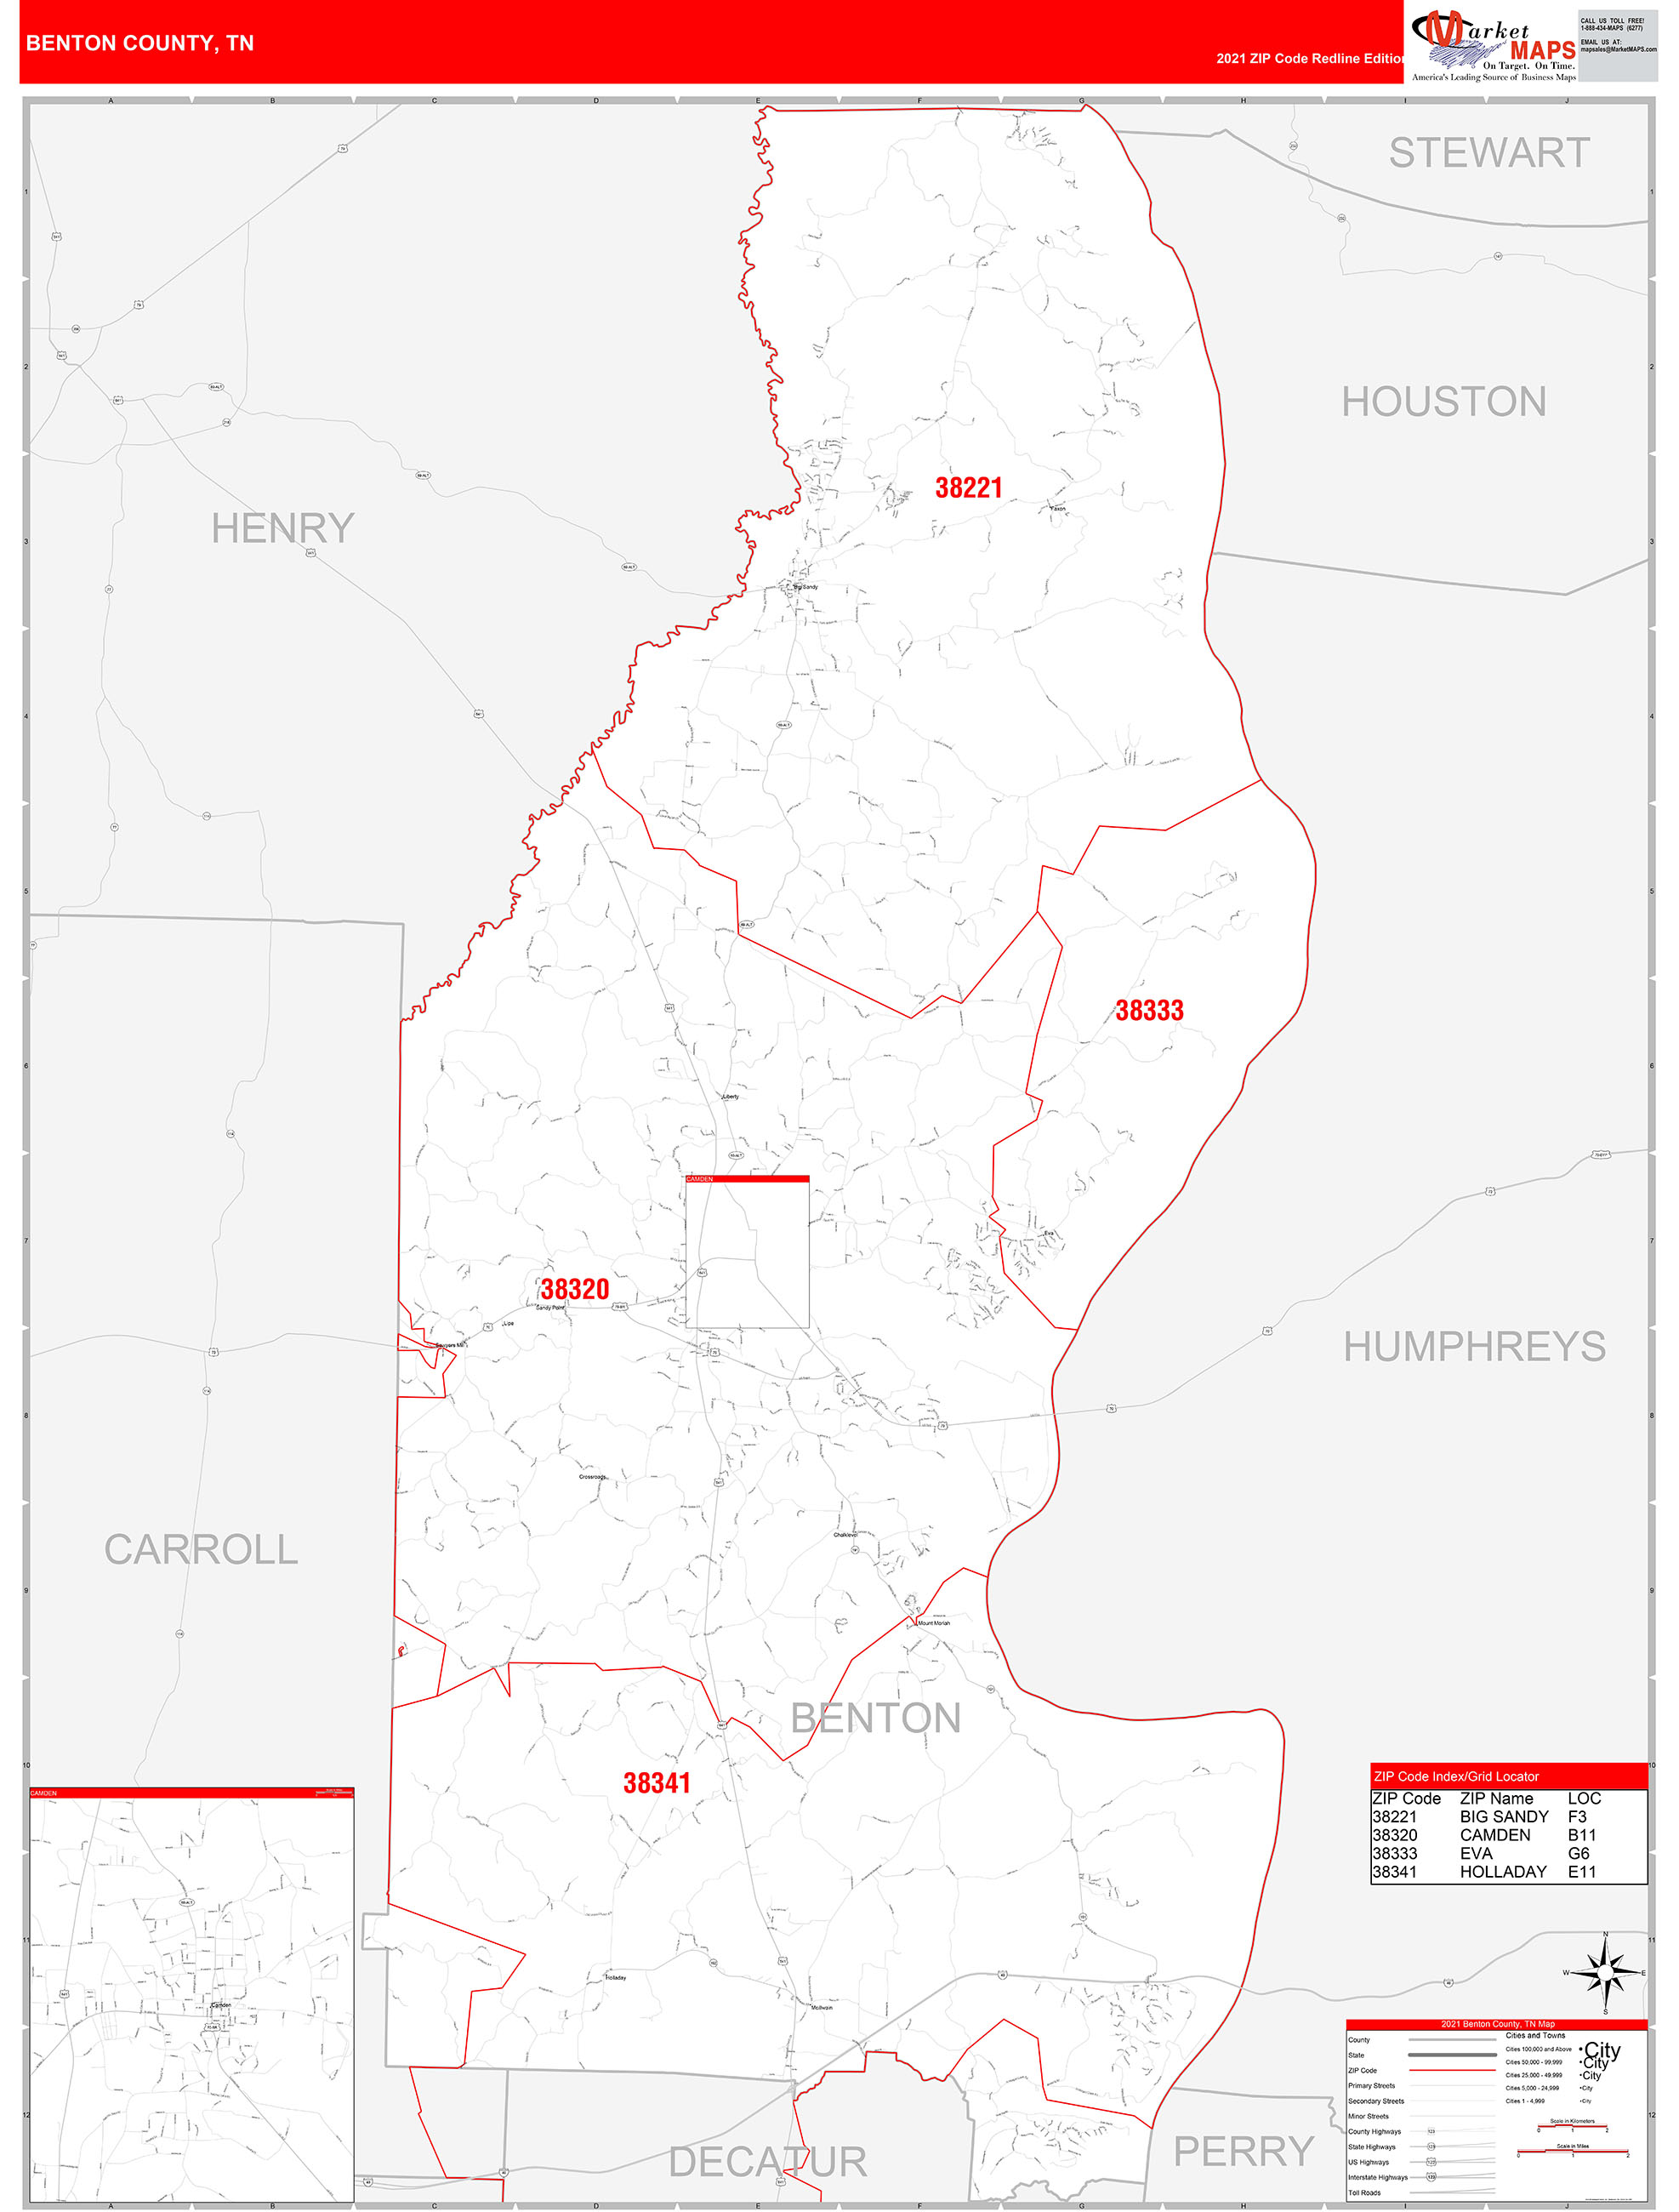 Benton County, TN Zip Code Wall Map Red Line Style by MarketMAPS MapSales